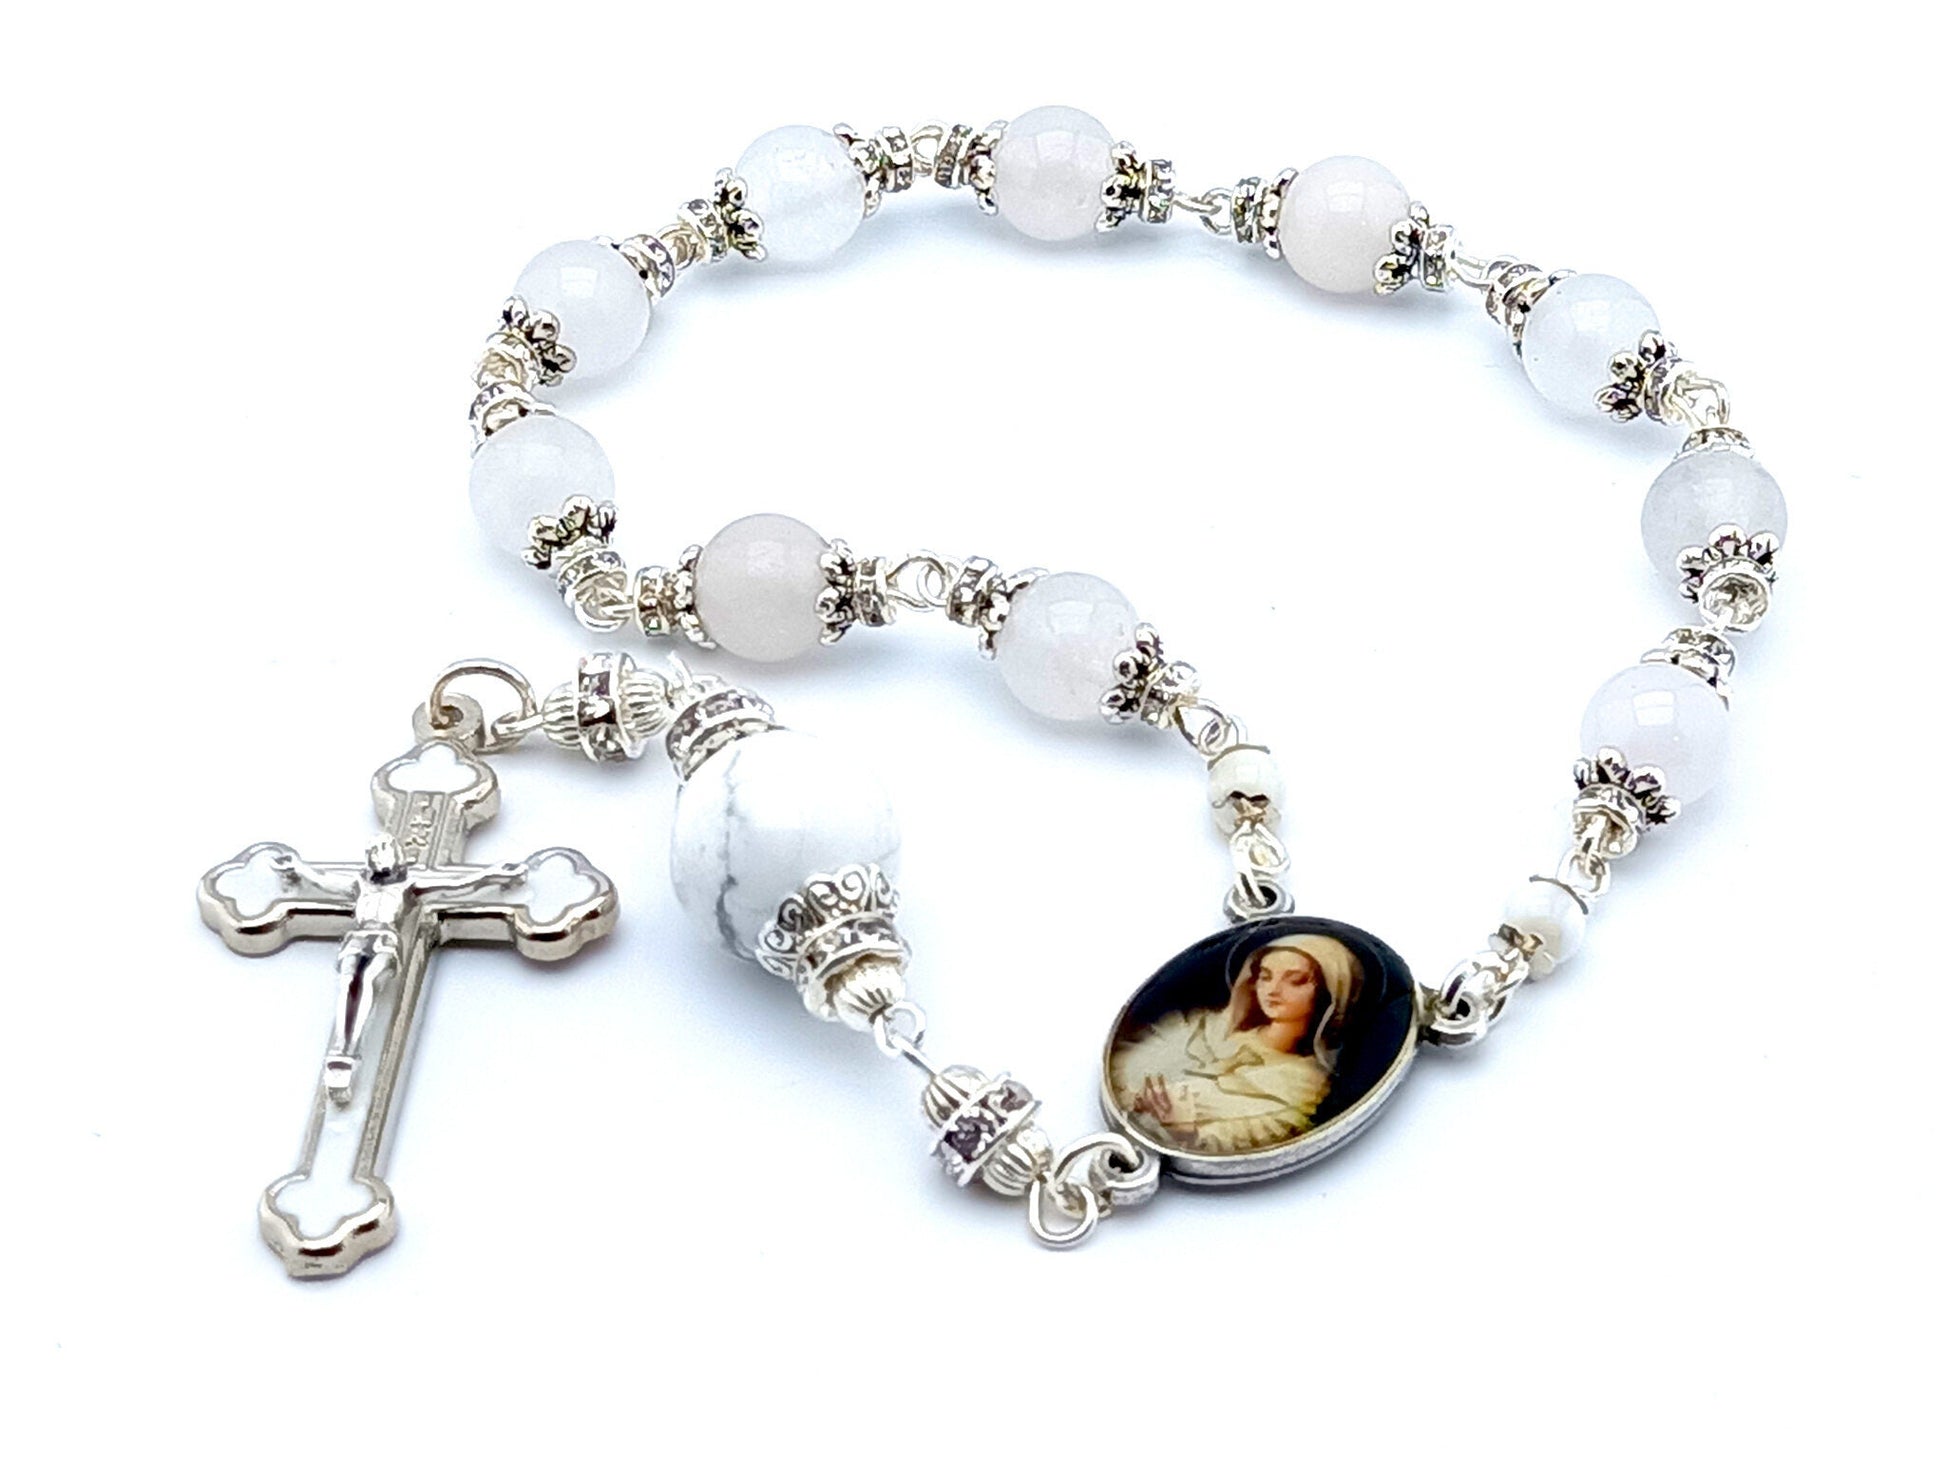 Our Lady and Holy Spirit unique rosary beads single decade rosary with opal and white gemstone beads, silver and white enamel crucifix and picture centre medal.